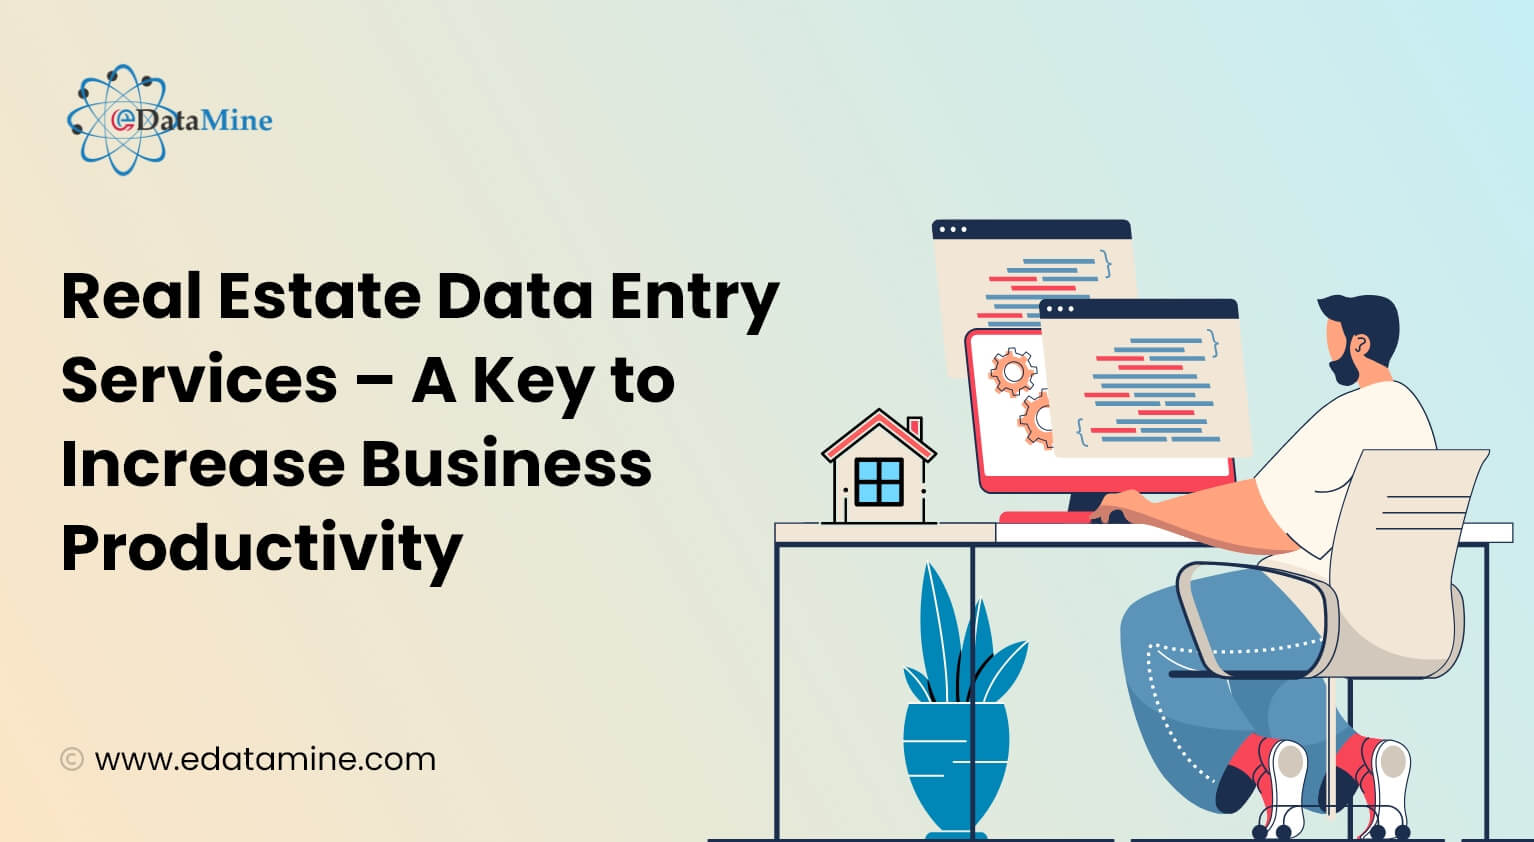 Real Estate Data Entry Services – A Key to Increase Business Productivity